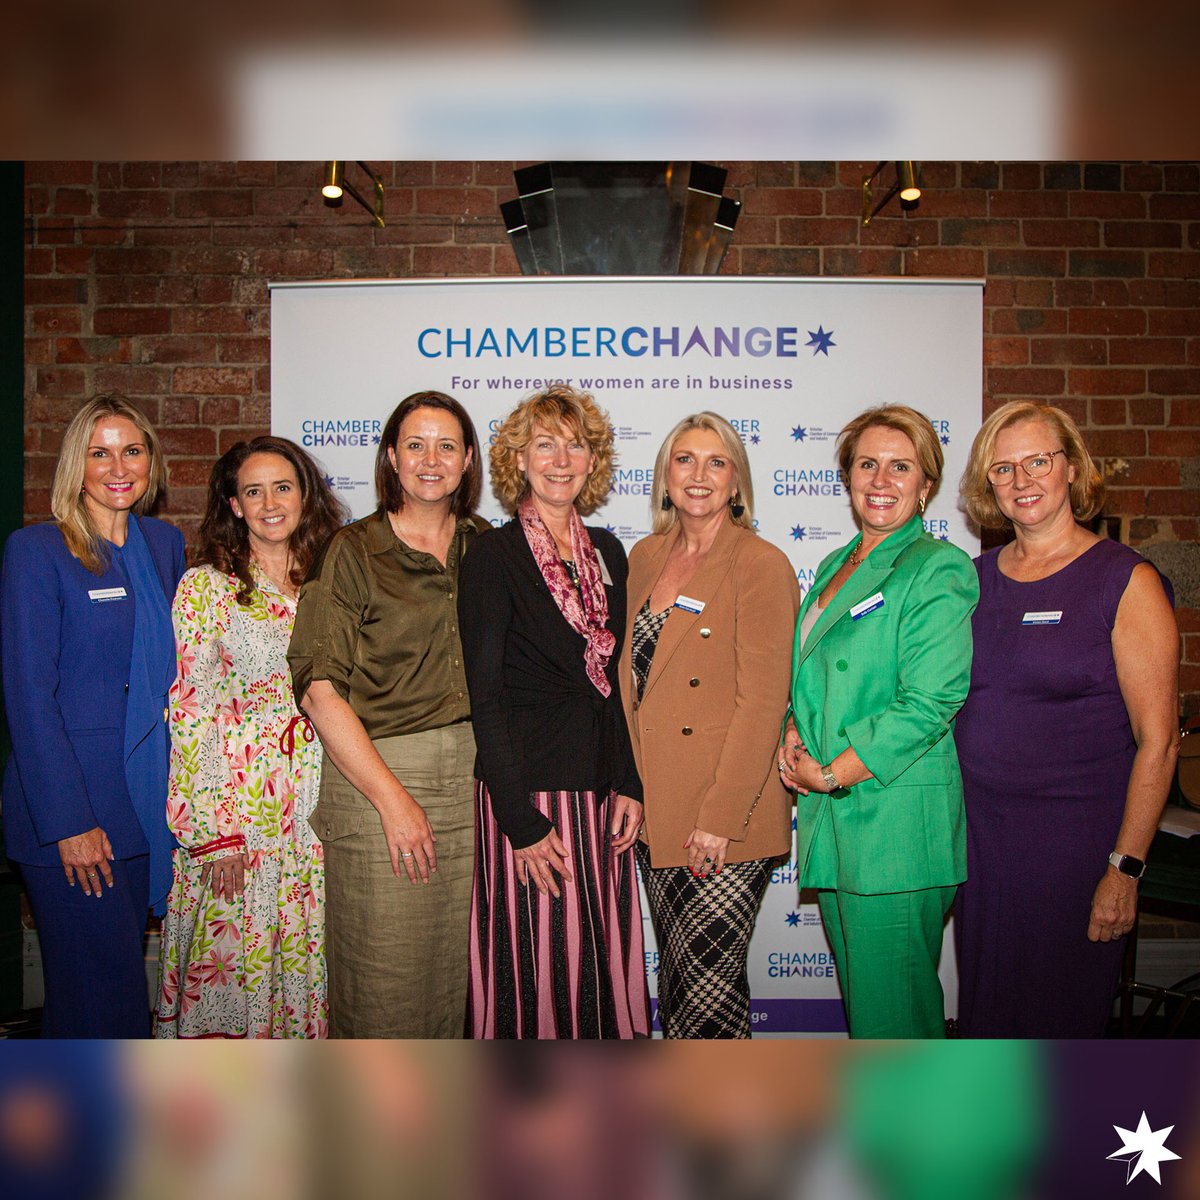 More than 100 guests attended our Chamber Change Networking Event at Trinket Bar last night. 
 
It was fantastic to hear from Executive Director at @PitcherPartner, Aileen O'Carroll who shared her inspiring career journey and experience as a Champion in Chamber Change.